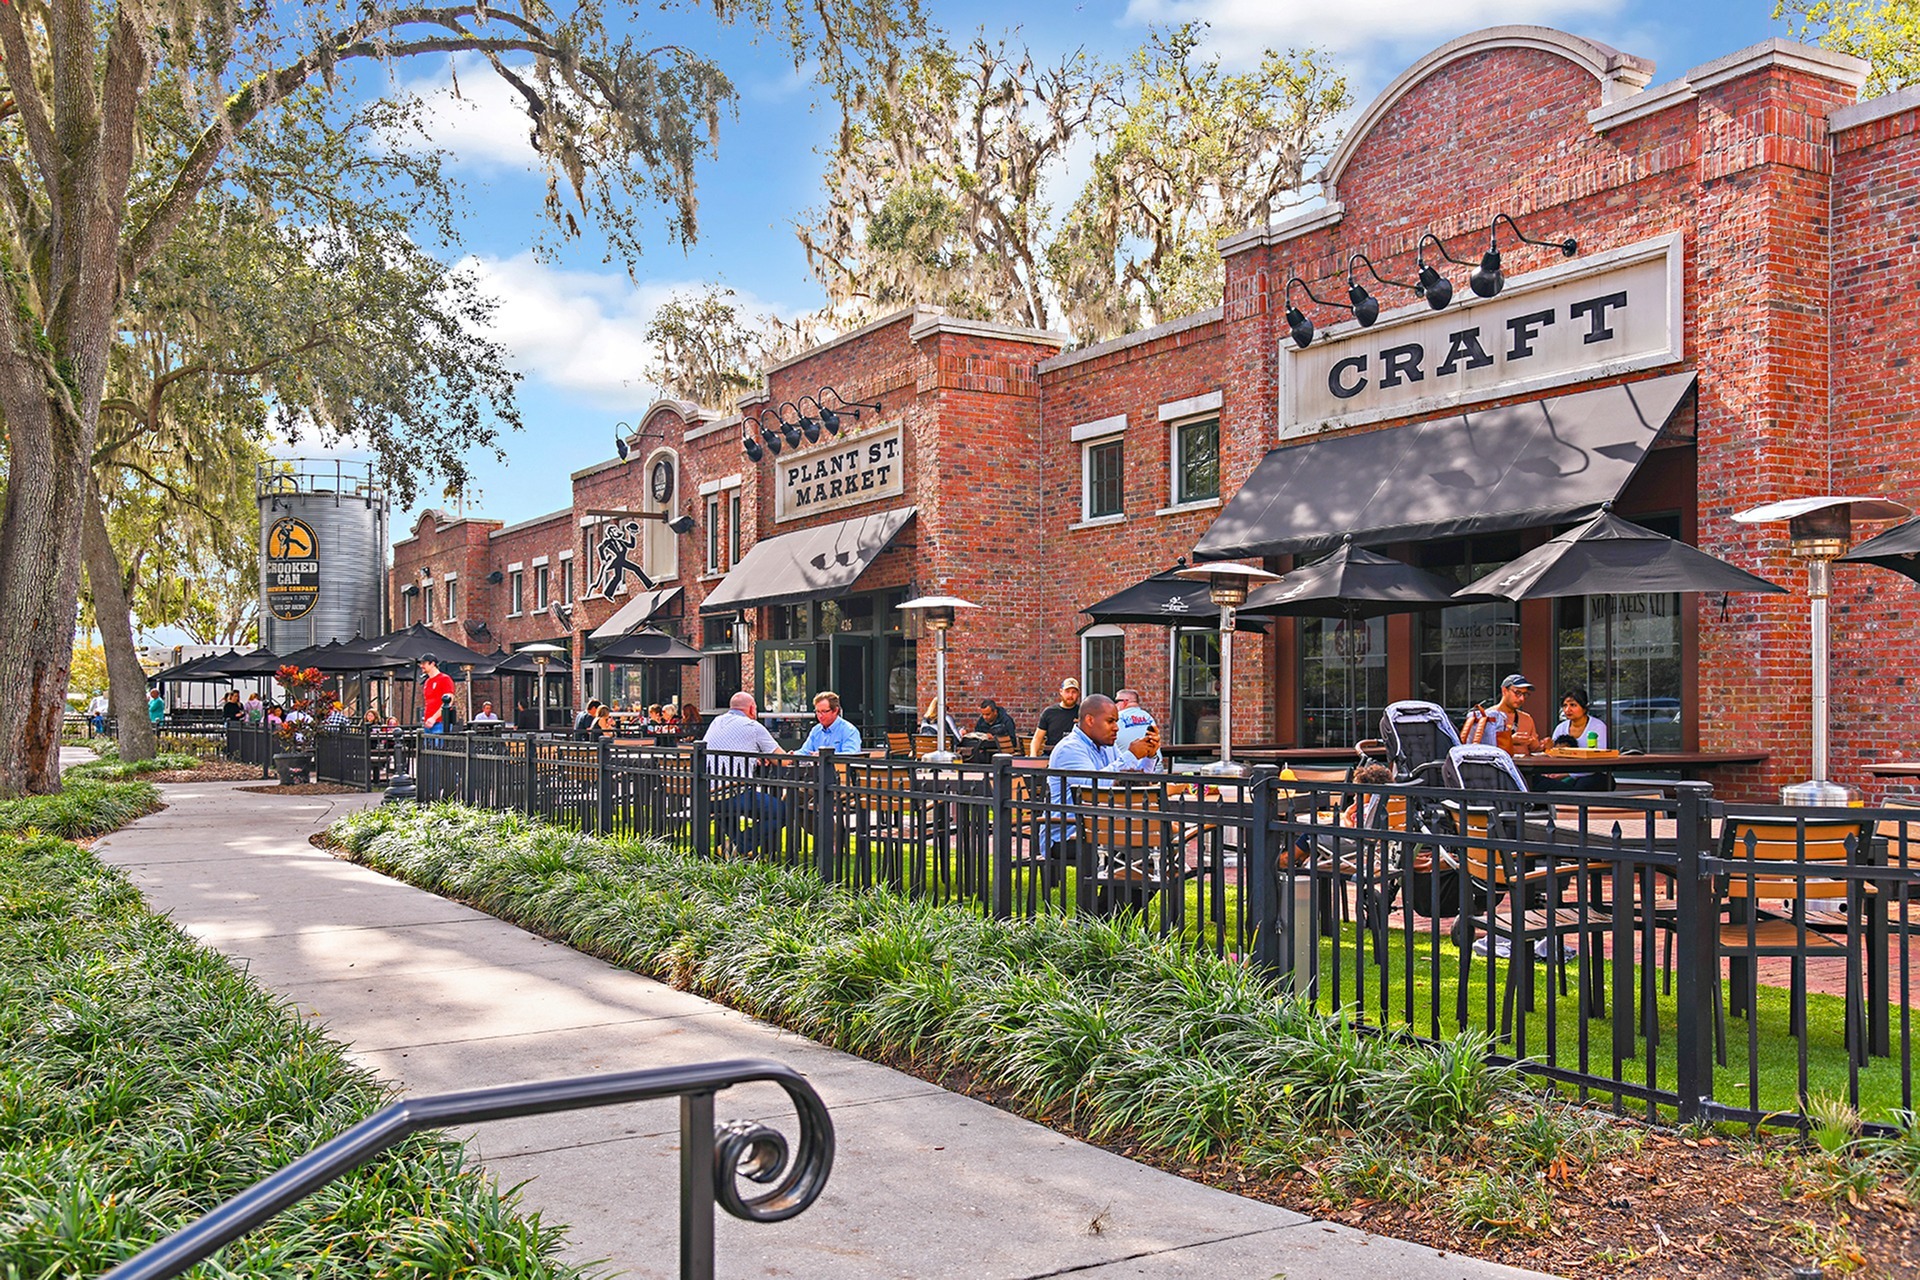 Small business and eateries near our townhomes in Popka, FL, featuring brick facades and people sitting outside dining.